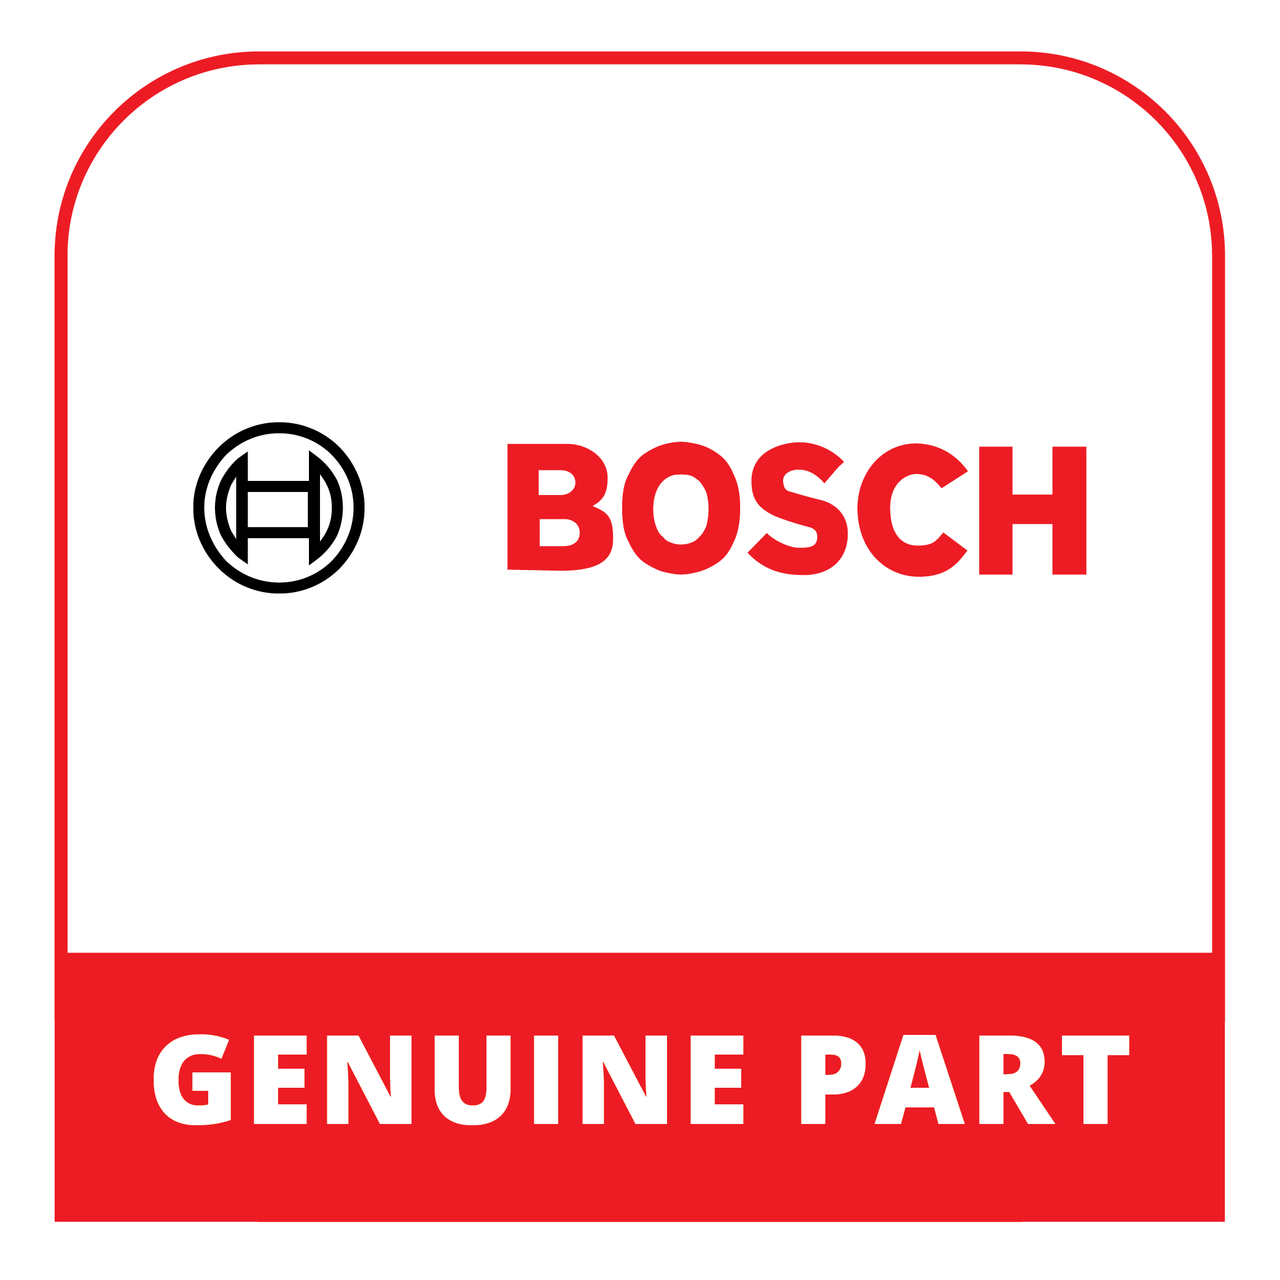 Bosch (Thermador) 12005137 - Control Module Not Programmed - Genuine Bosch (Thermador) Part